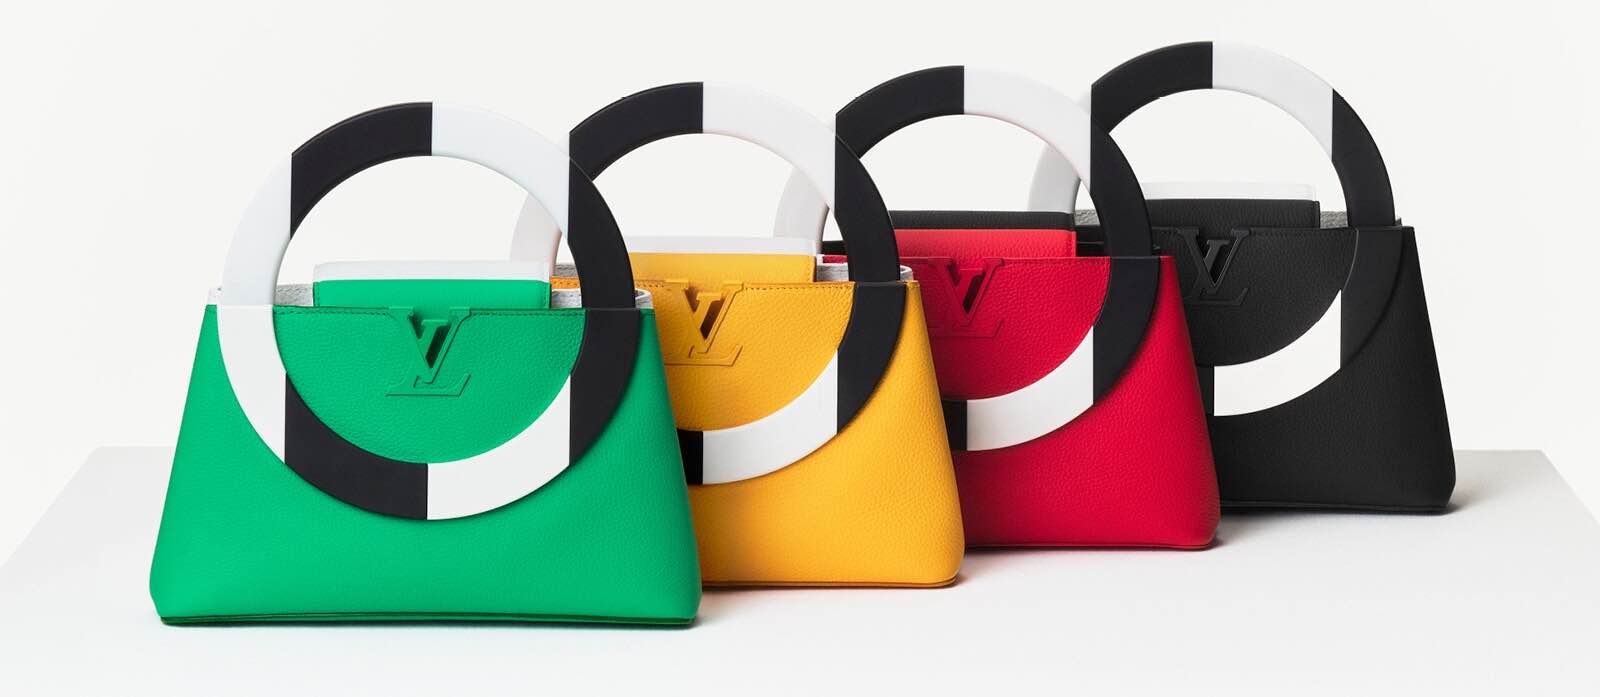 Artycapucines Collection  Louis Vuitton's New Hand Bags Are Super Fresh